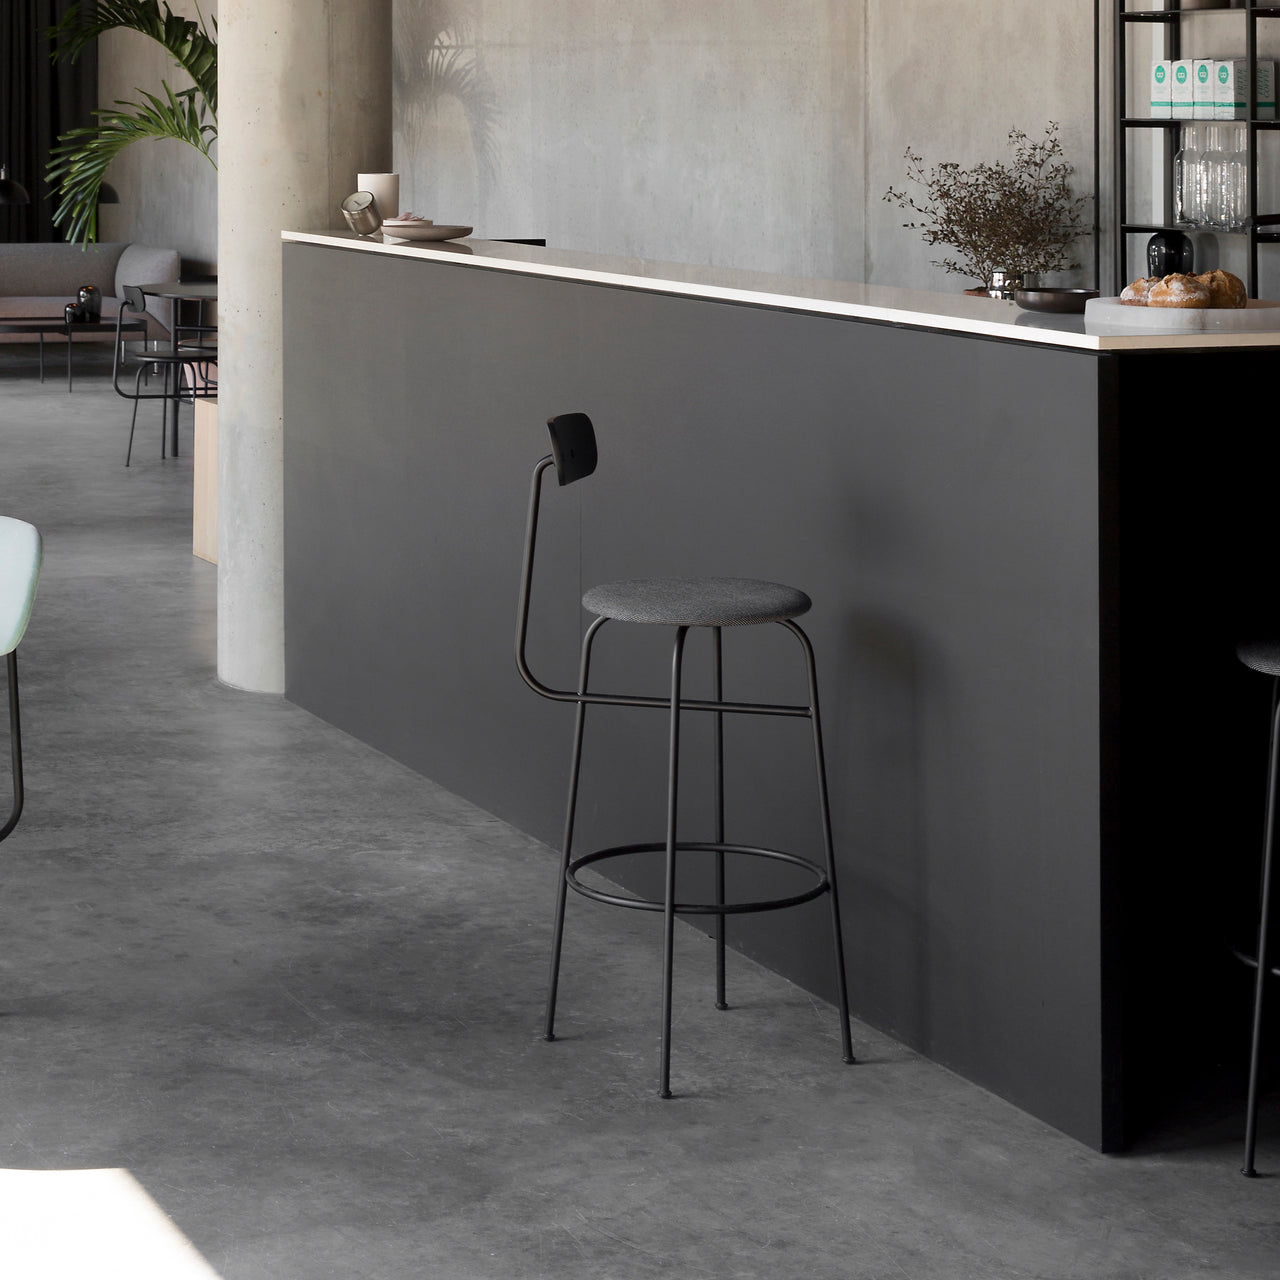 Afteroom Bar + Counter Chair: Upholstered